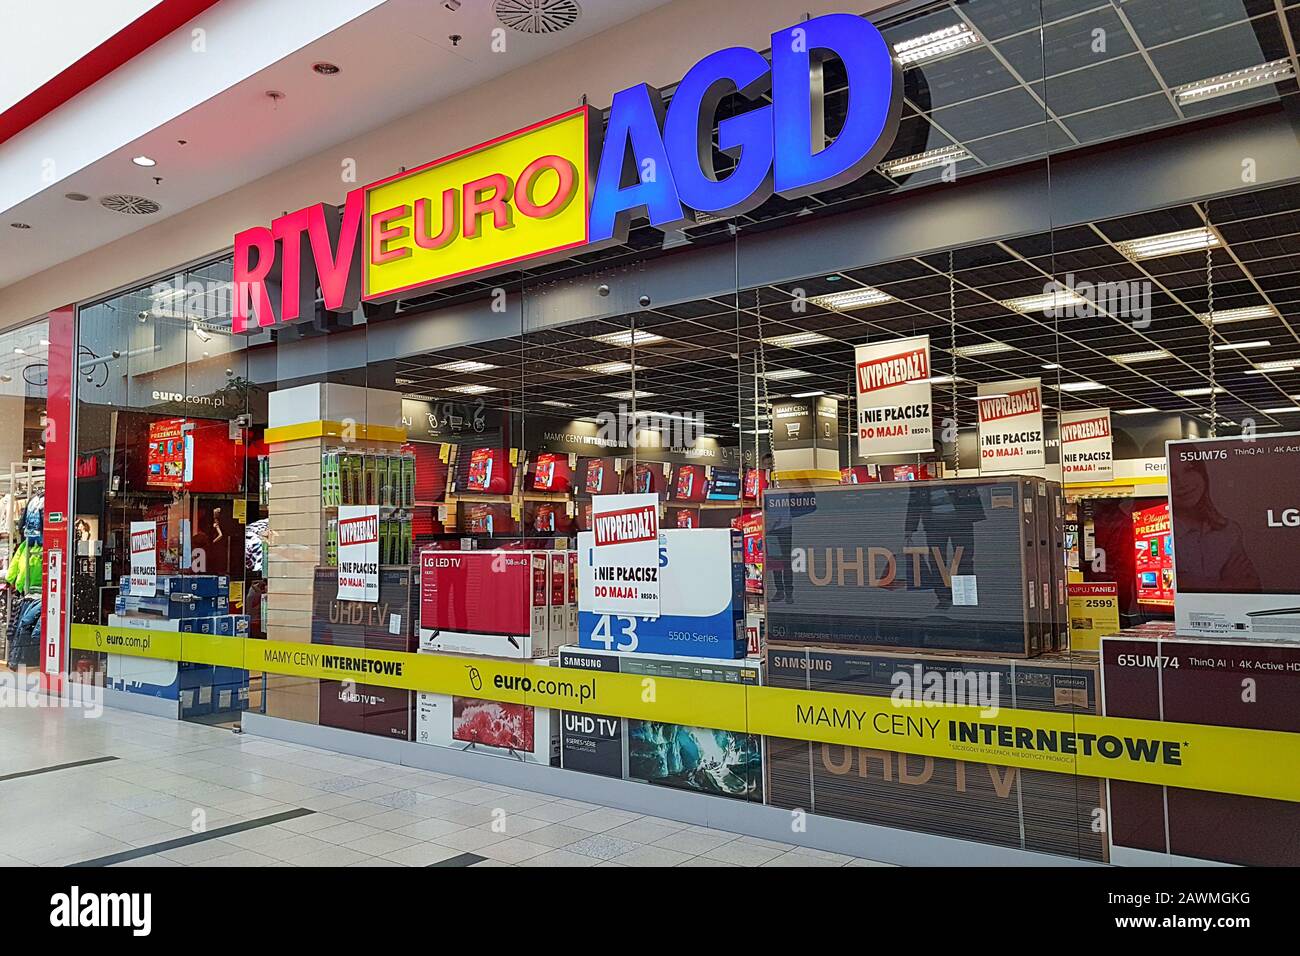 Nowy Sacz, Poland - December 29, 2019: Exterior view of the RTV Euro AGD  store. RTV Euro AGD is a polish retail network offering consumer electronic  Stock Photo - Alamy